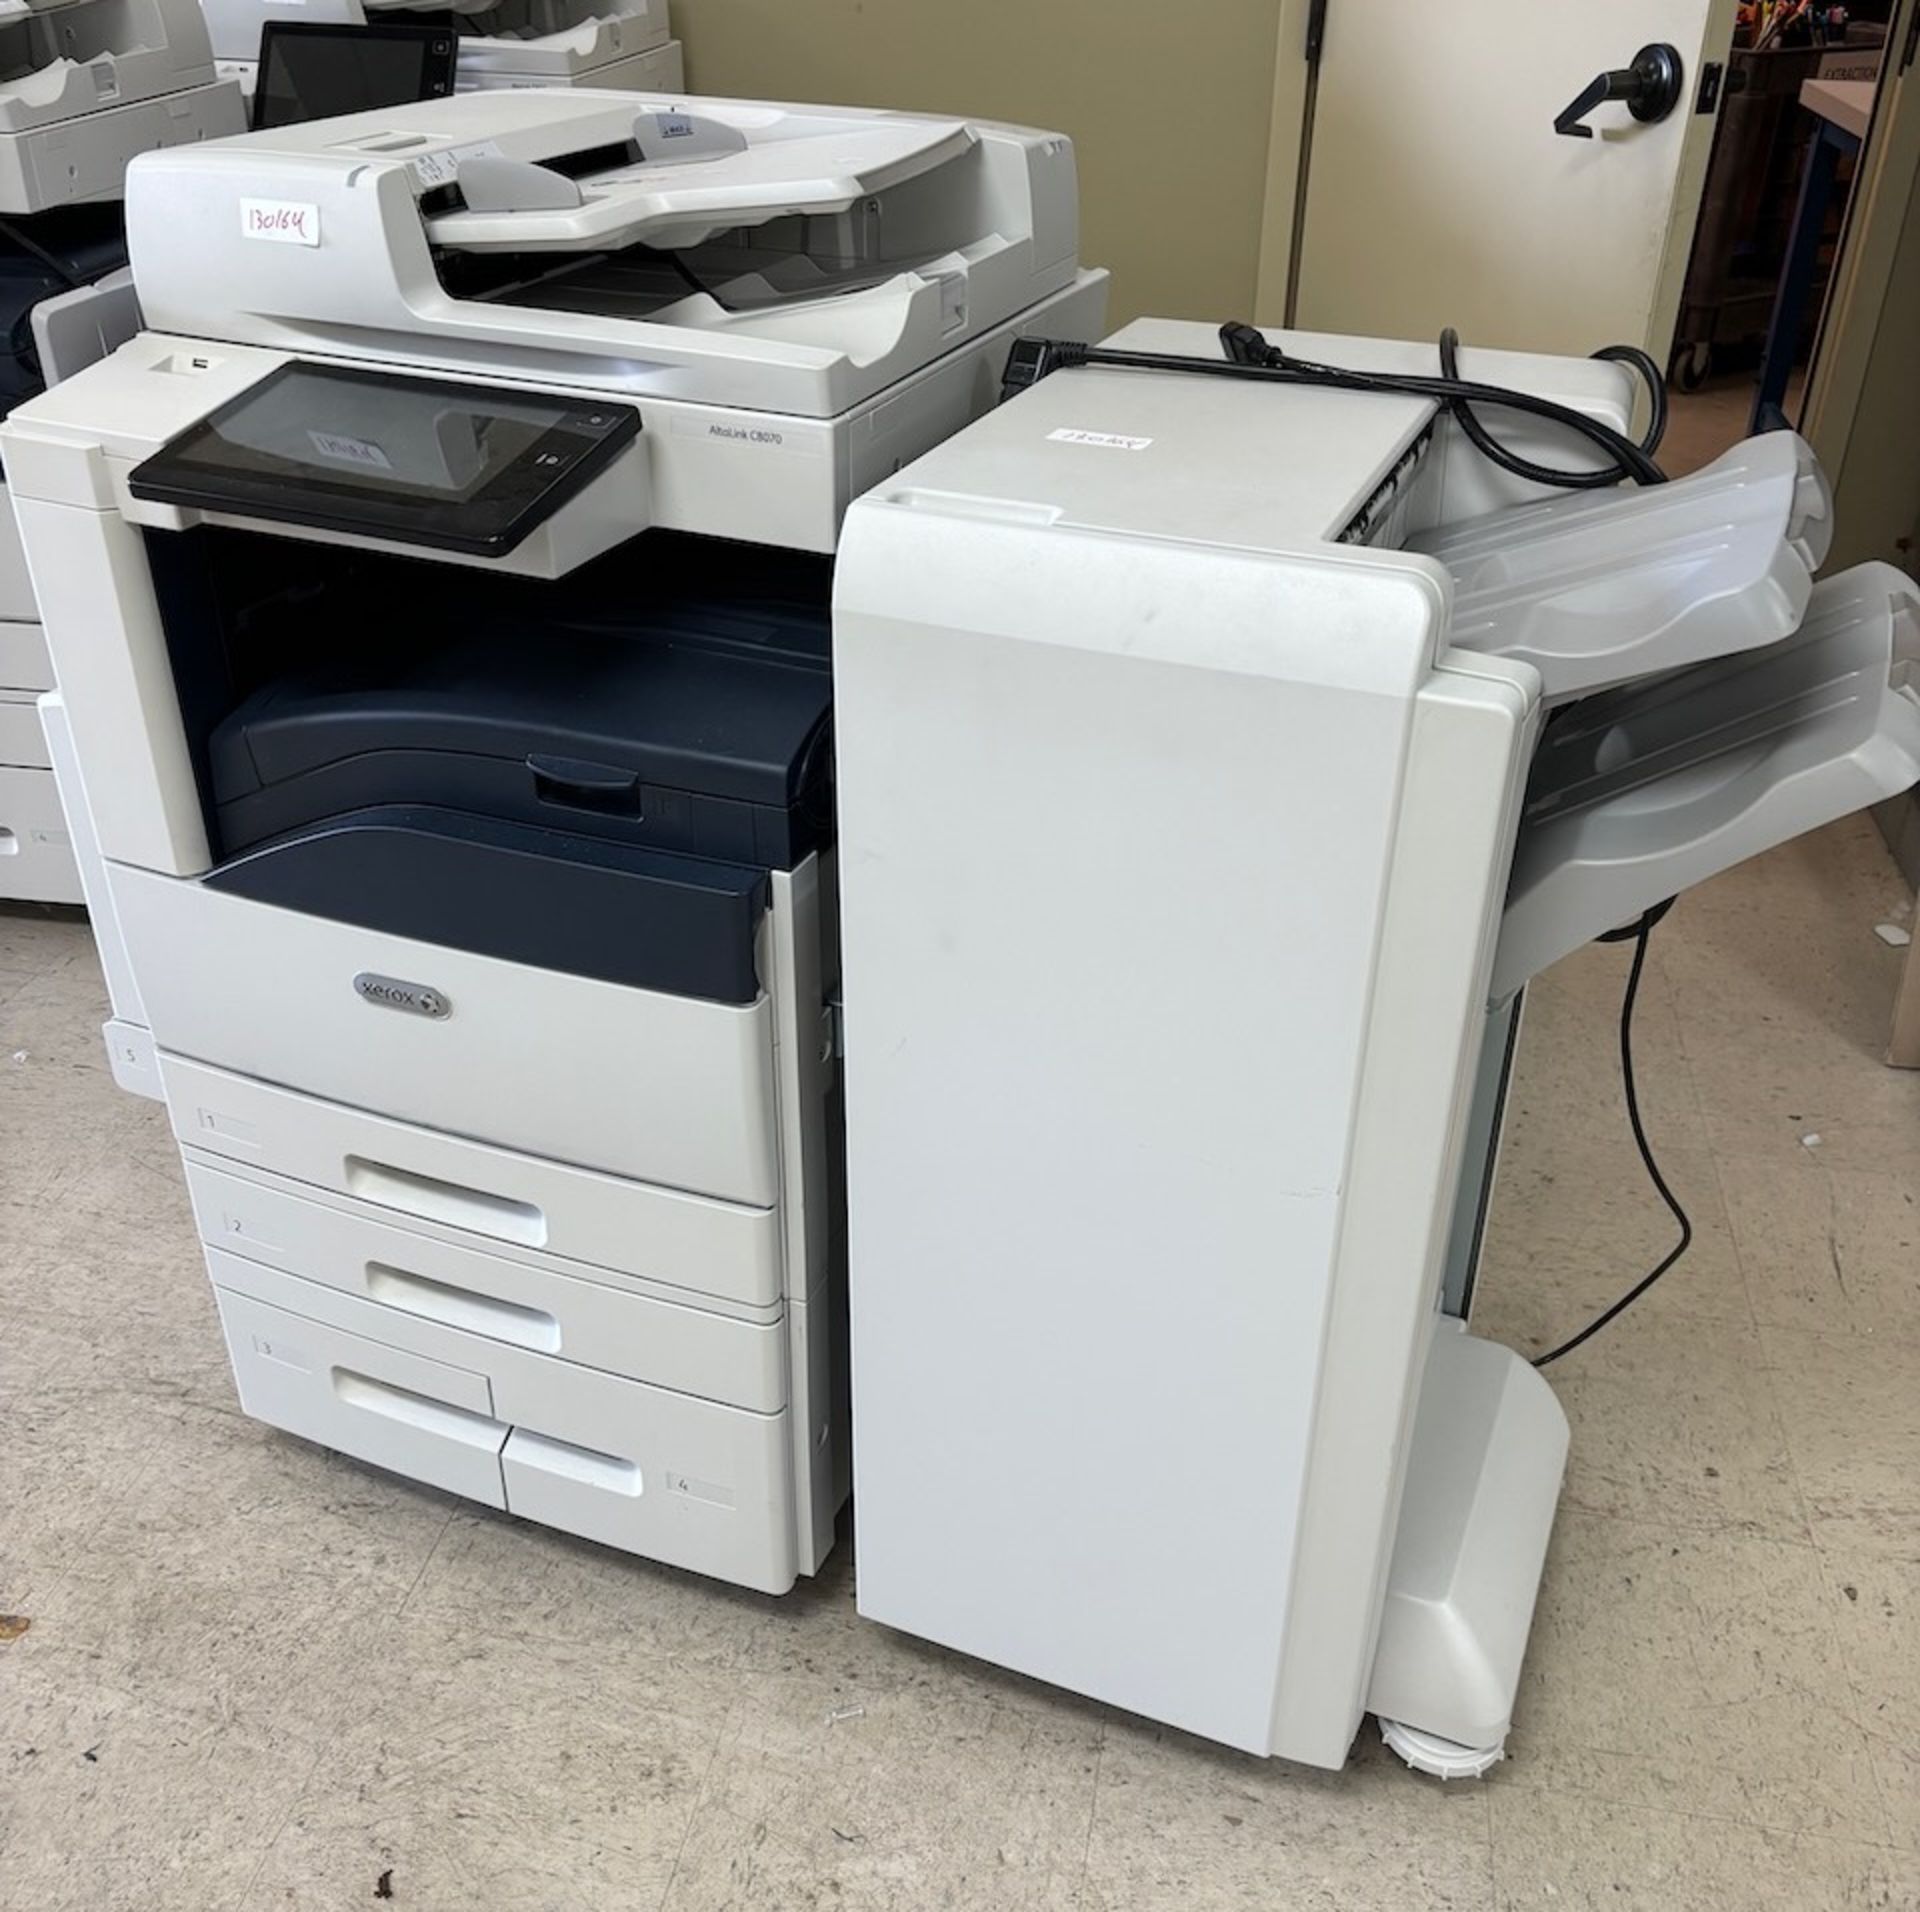 2019 Xerox Multifunction Color Printer - See Auctioneers Note